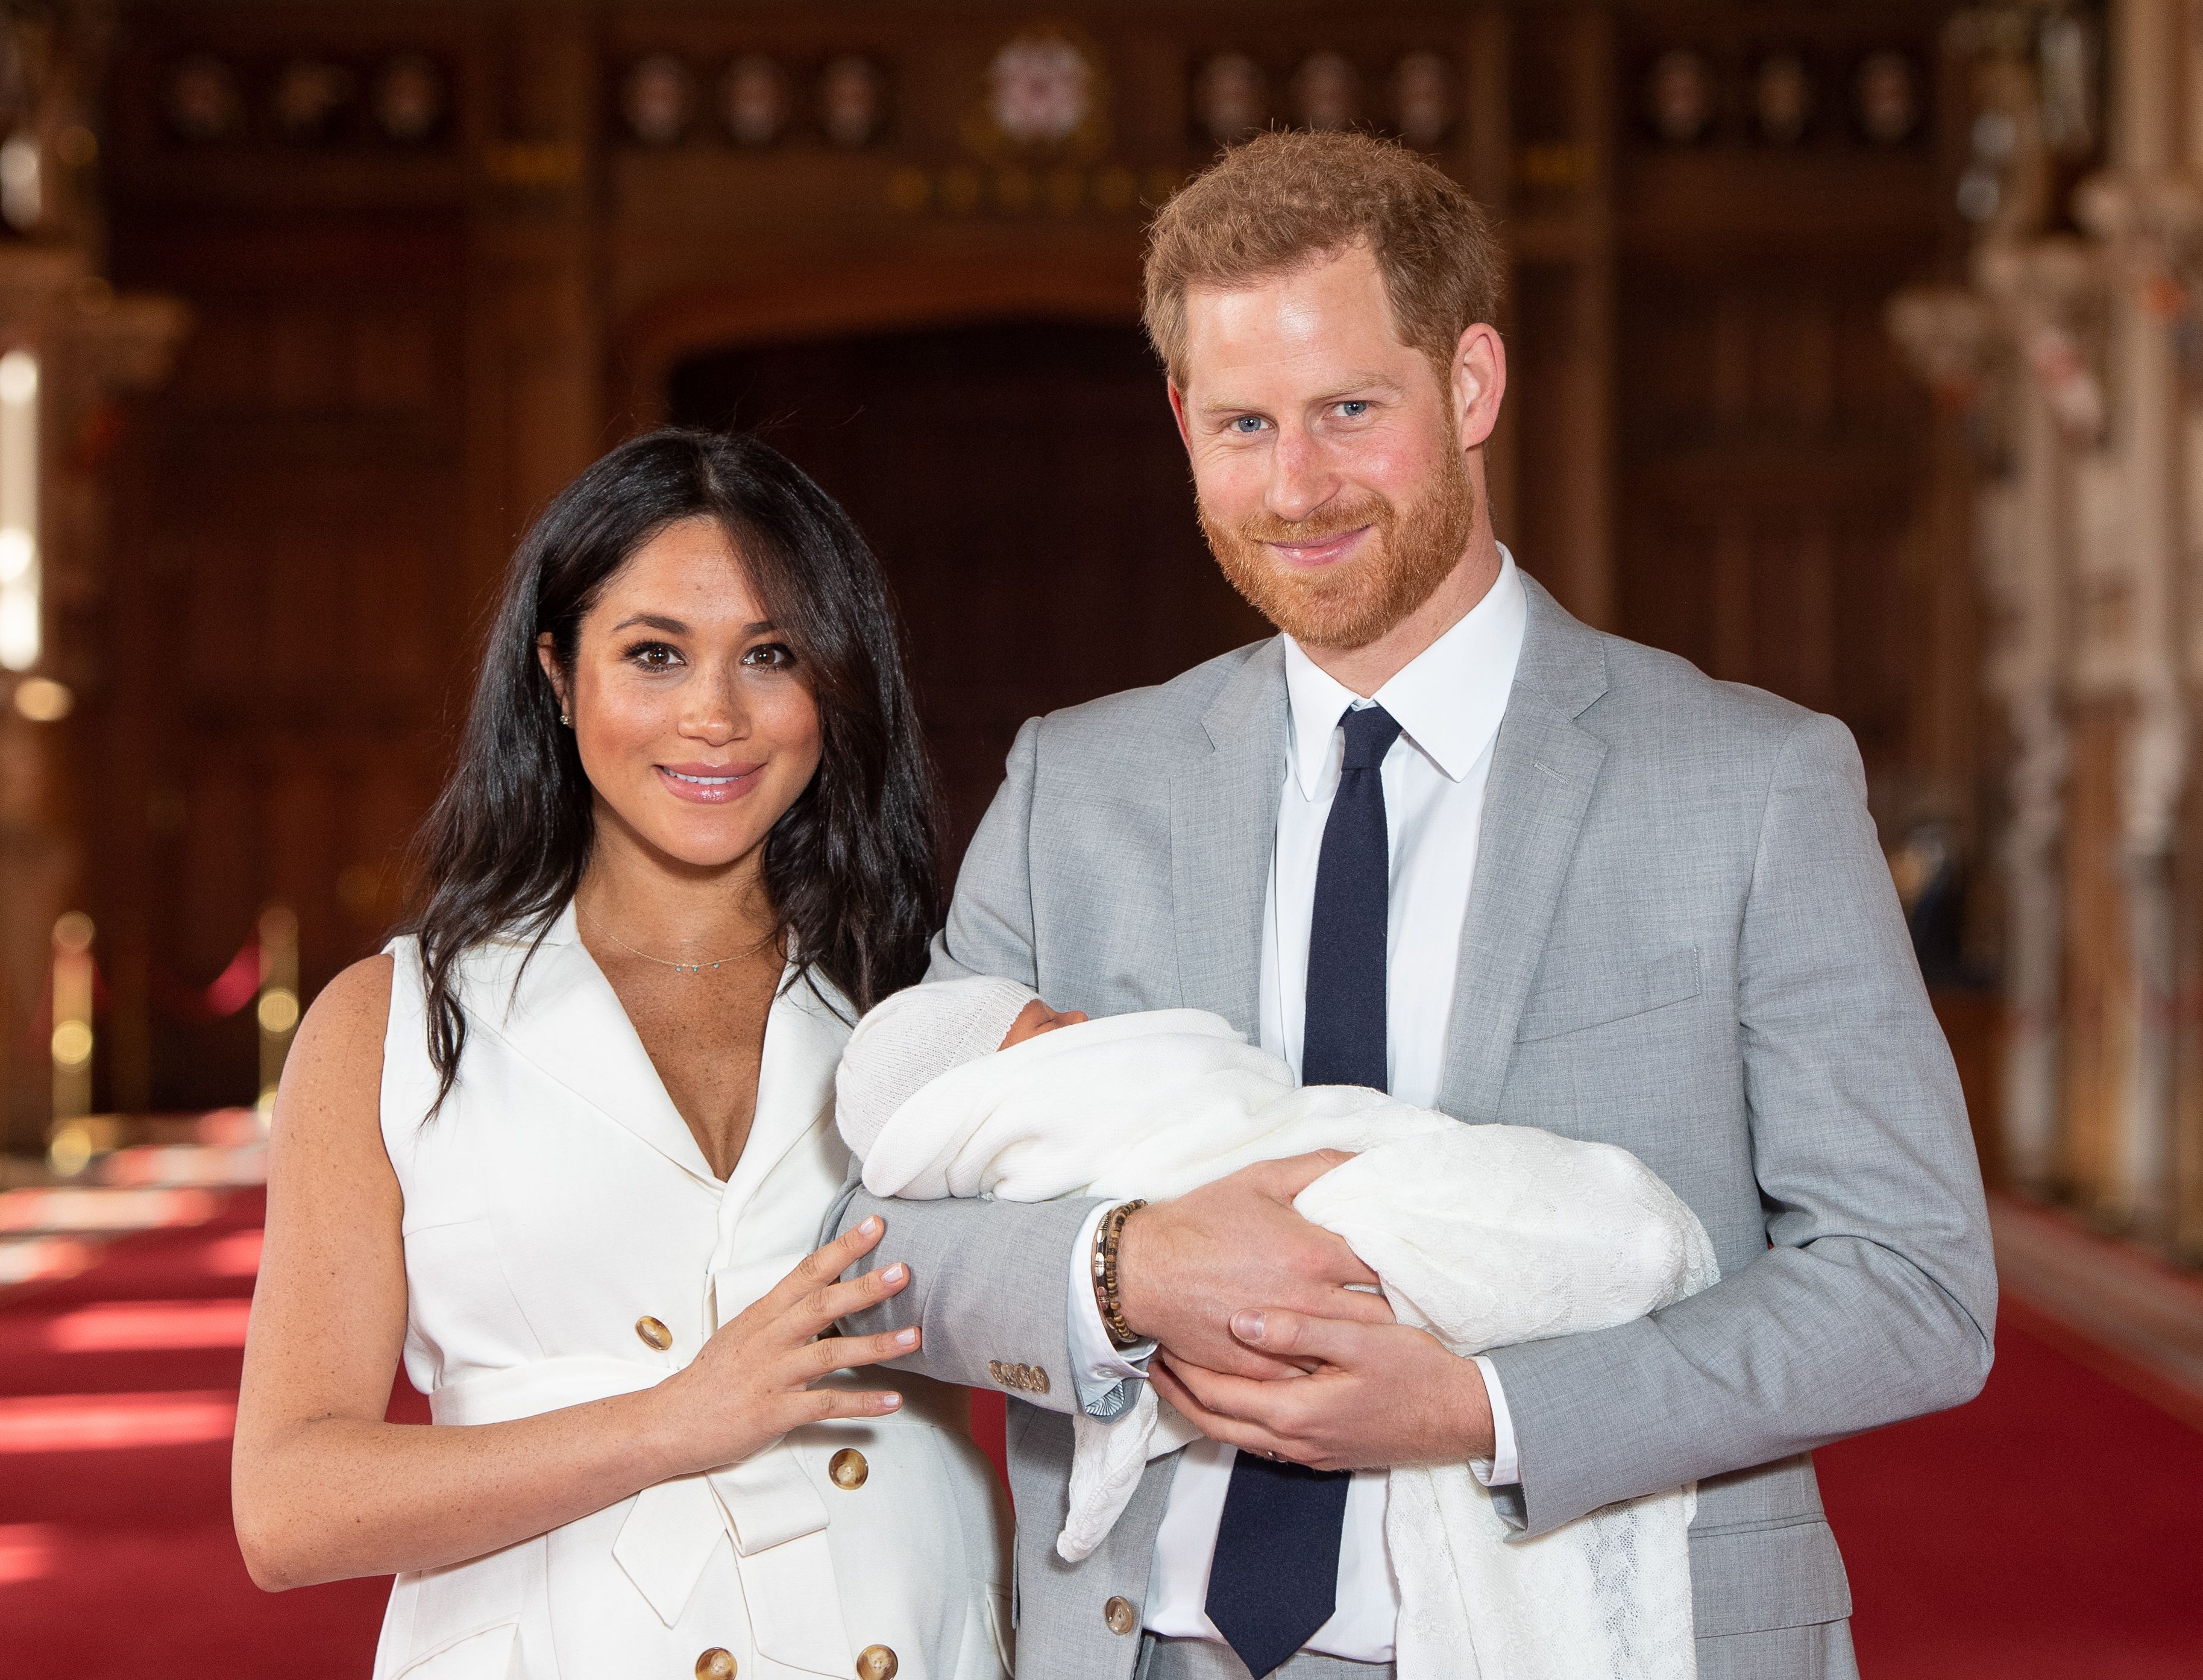 Baby Archie is the MVP in the Sussexes’ Christmas Card EverydayKoala